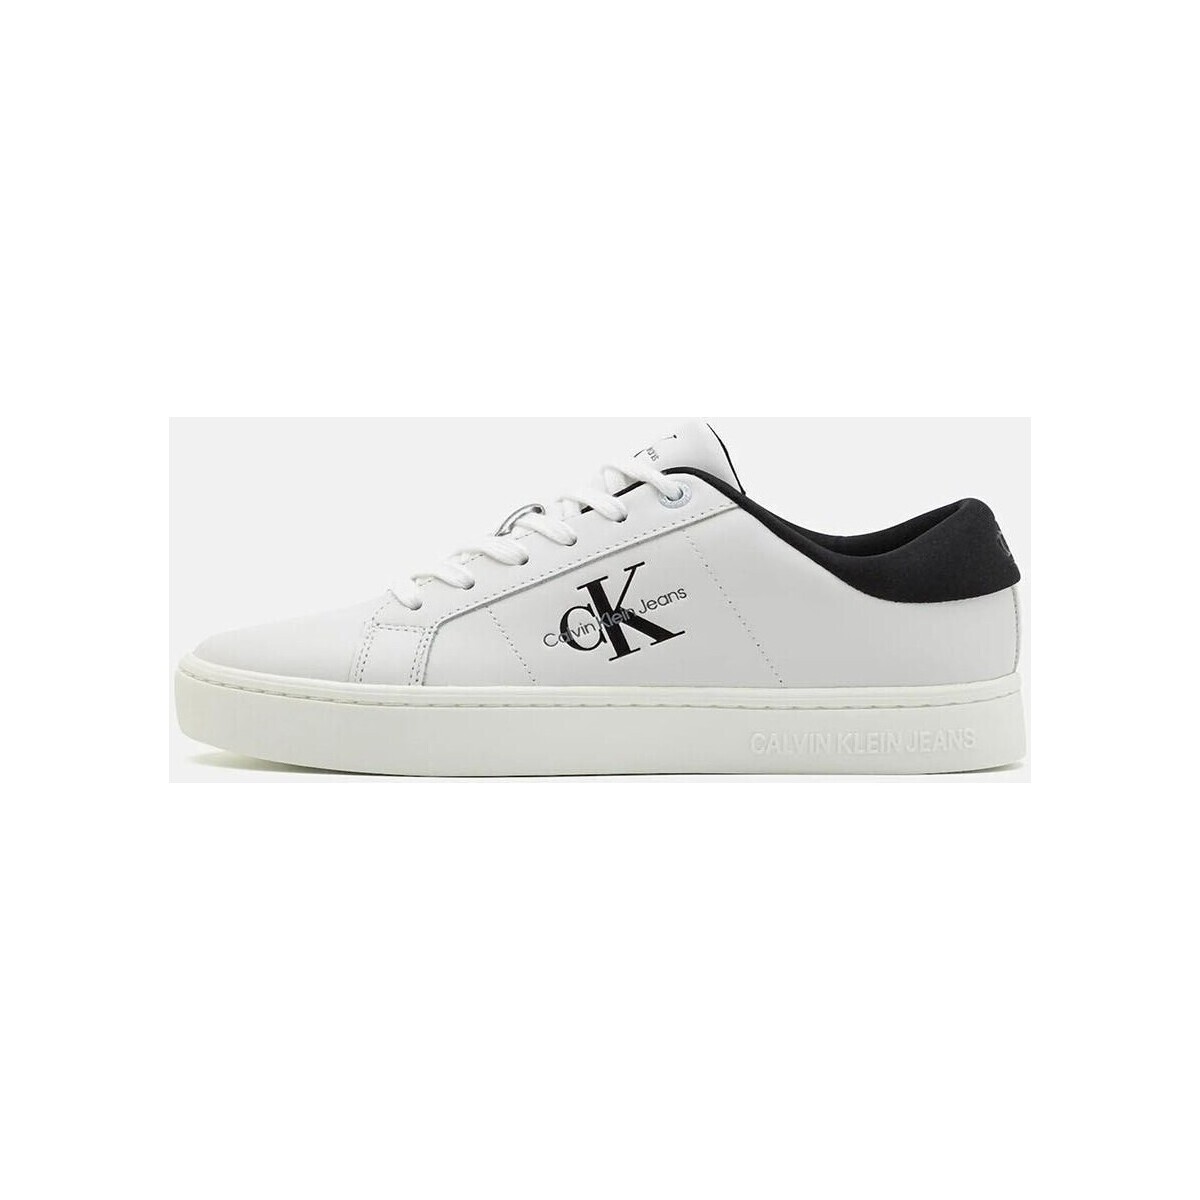 Ck Jeans  Sneakers Ck Jeans -